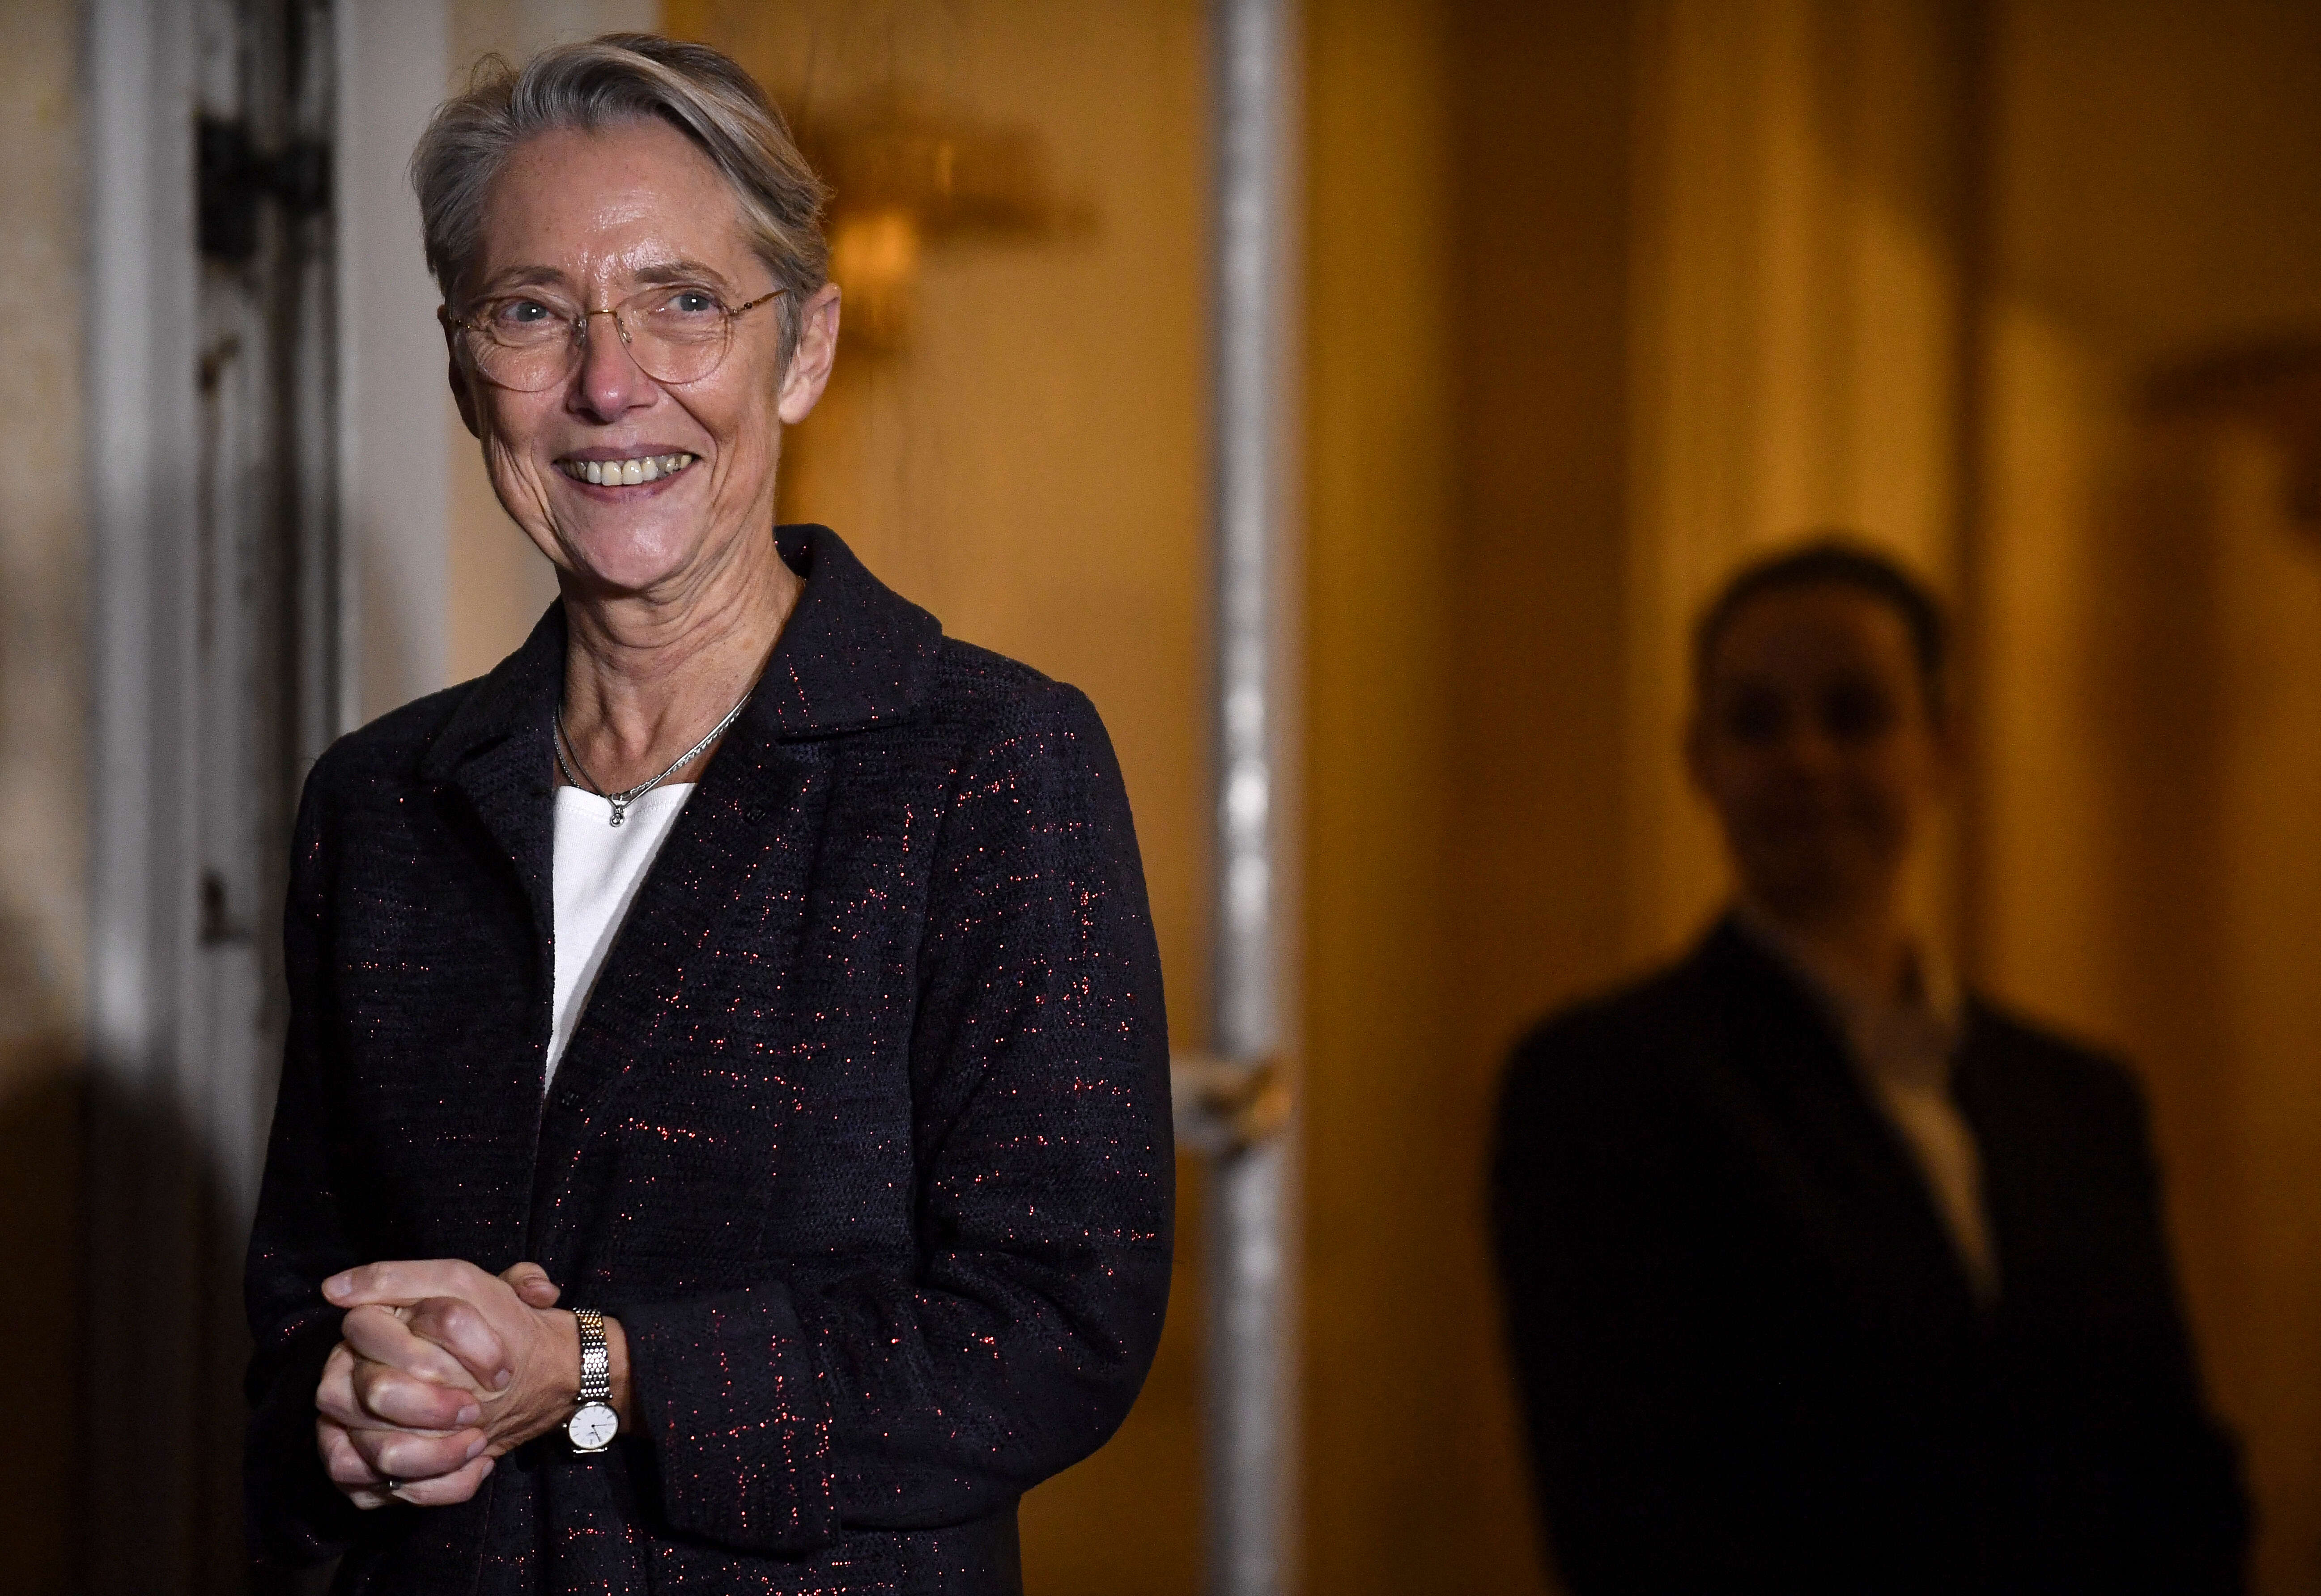 French Prime Minister Elisabeth Borne reacts as she welcomes Ukrainian Prime Minister for a meeting and a working dinner at the Hotel de Matignon, in Paris, on December 12, 2022. (Photo by JULIEN DE ROSA / POOL / AFP)